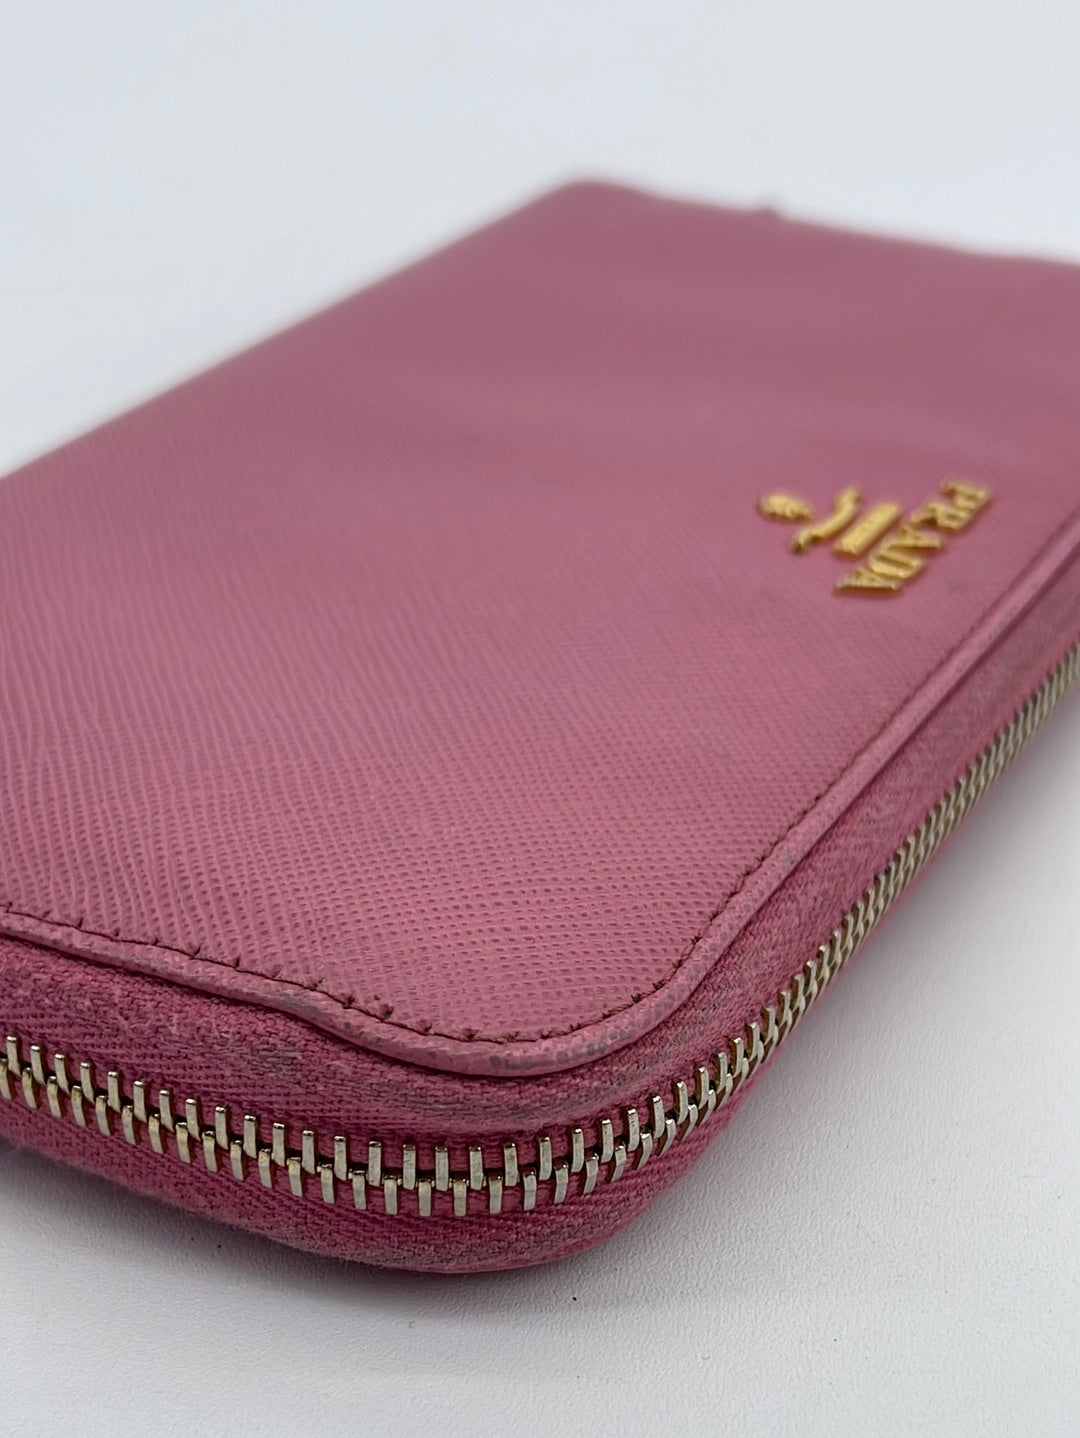 Prada Pre-owned Women's Leather Wallet - Pink - One Size